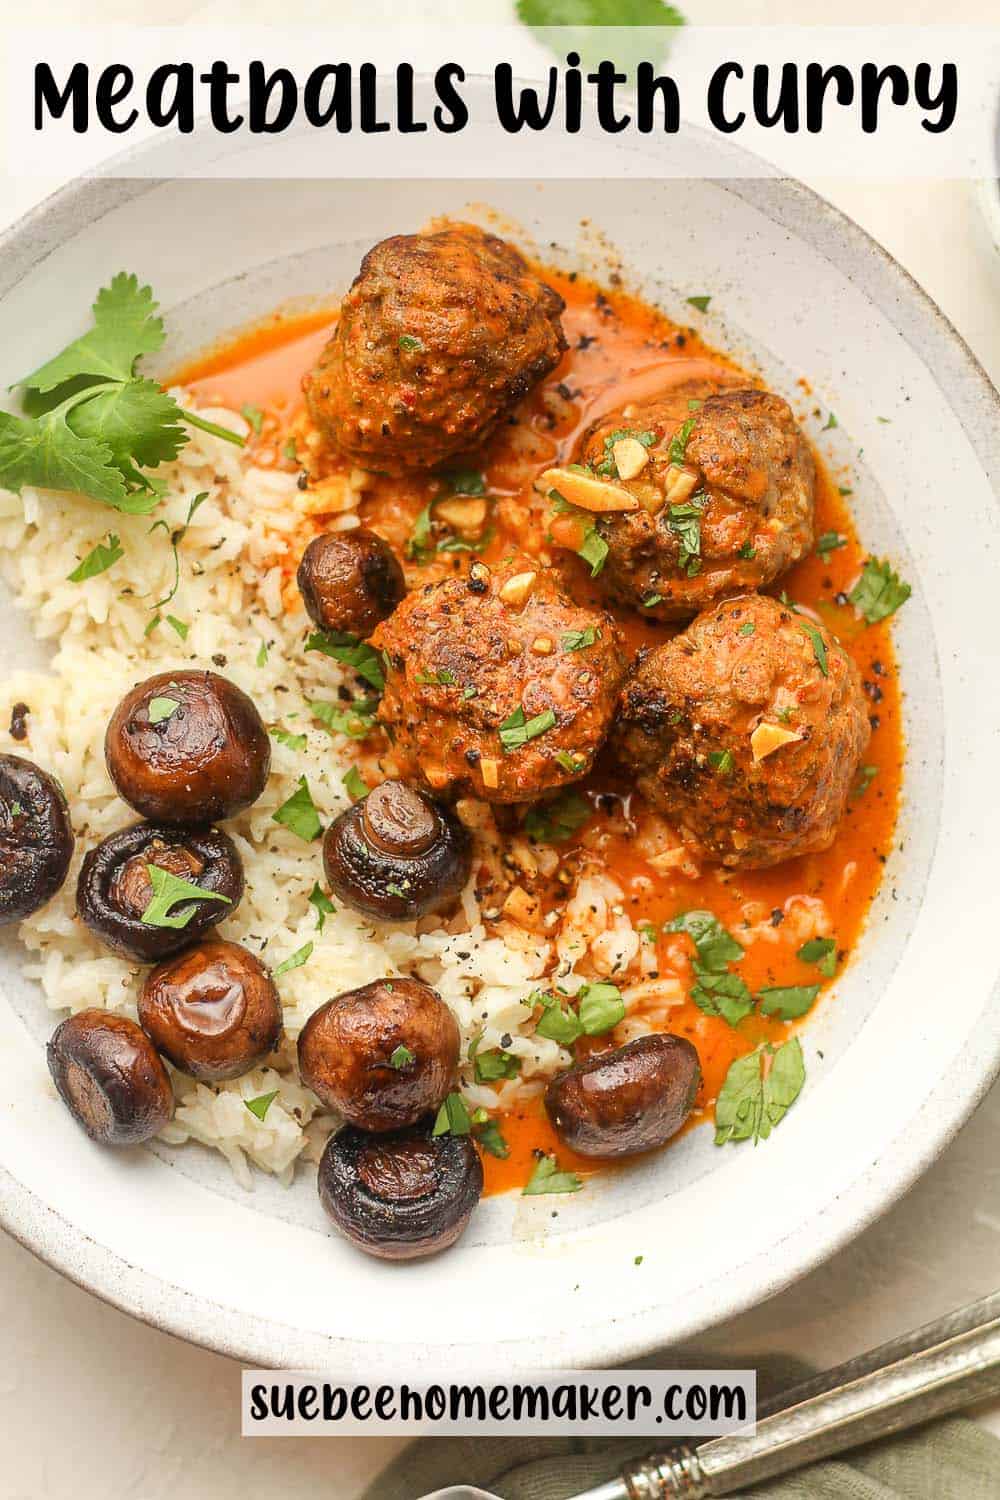 A bowl of meatballs with curry sauce over rice.